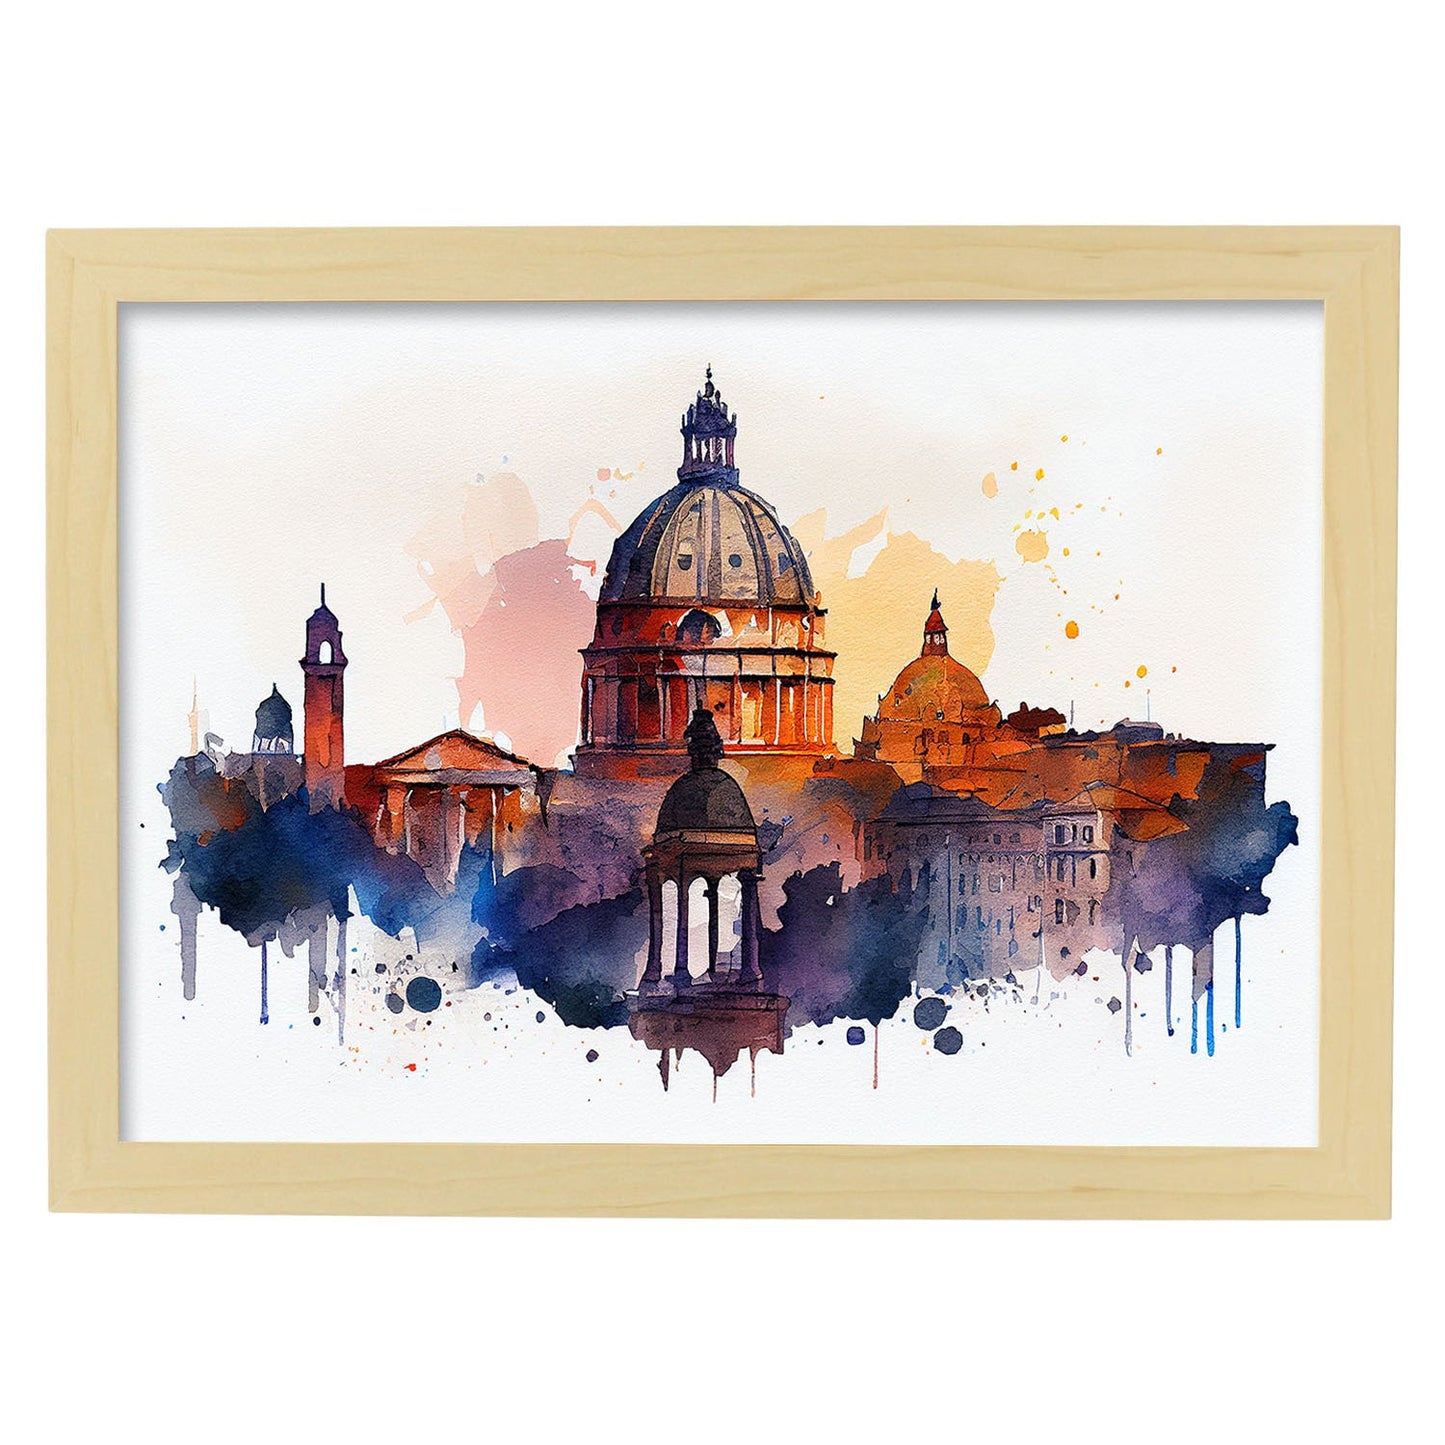 Nacnic watercolor of a skyline of the city of Rome_2. Aesthetic Wall Art Prints for Bedroom or Living Room Design.-Artwork-Nacnic-A4-Marco Madera Clara-Nacnic Estudio SL